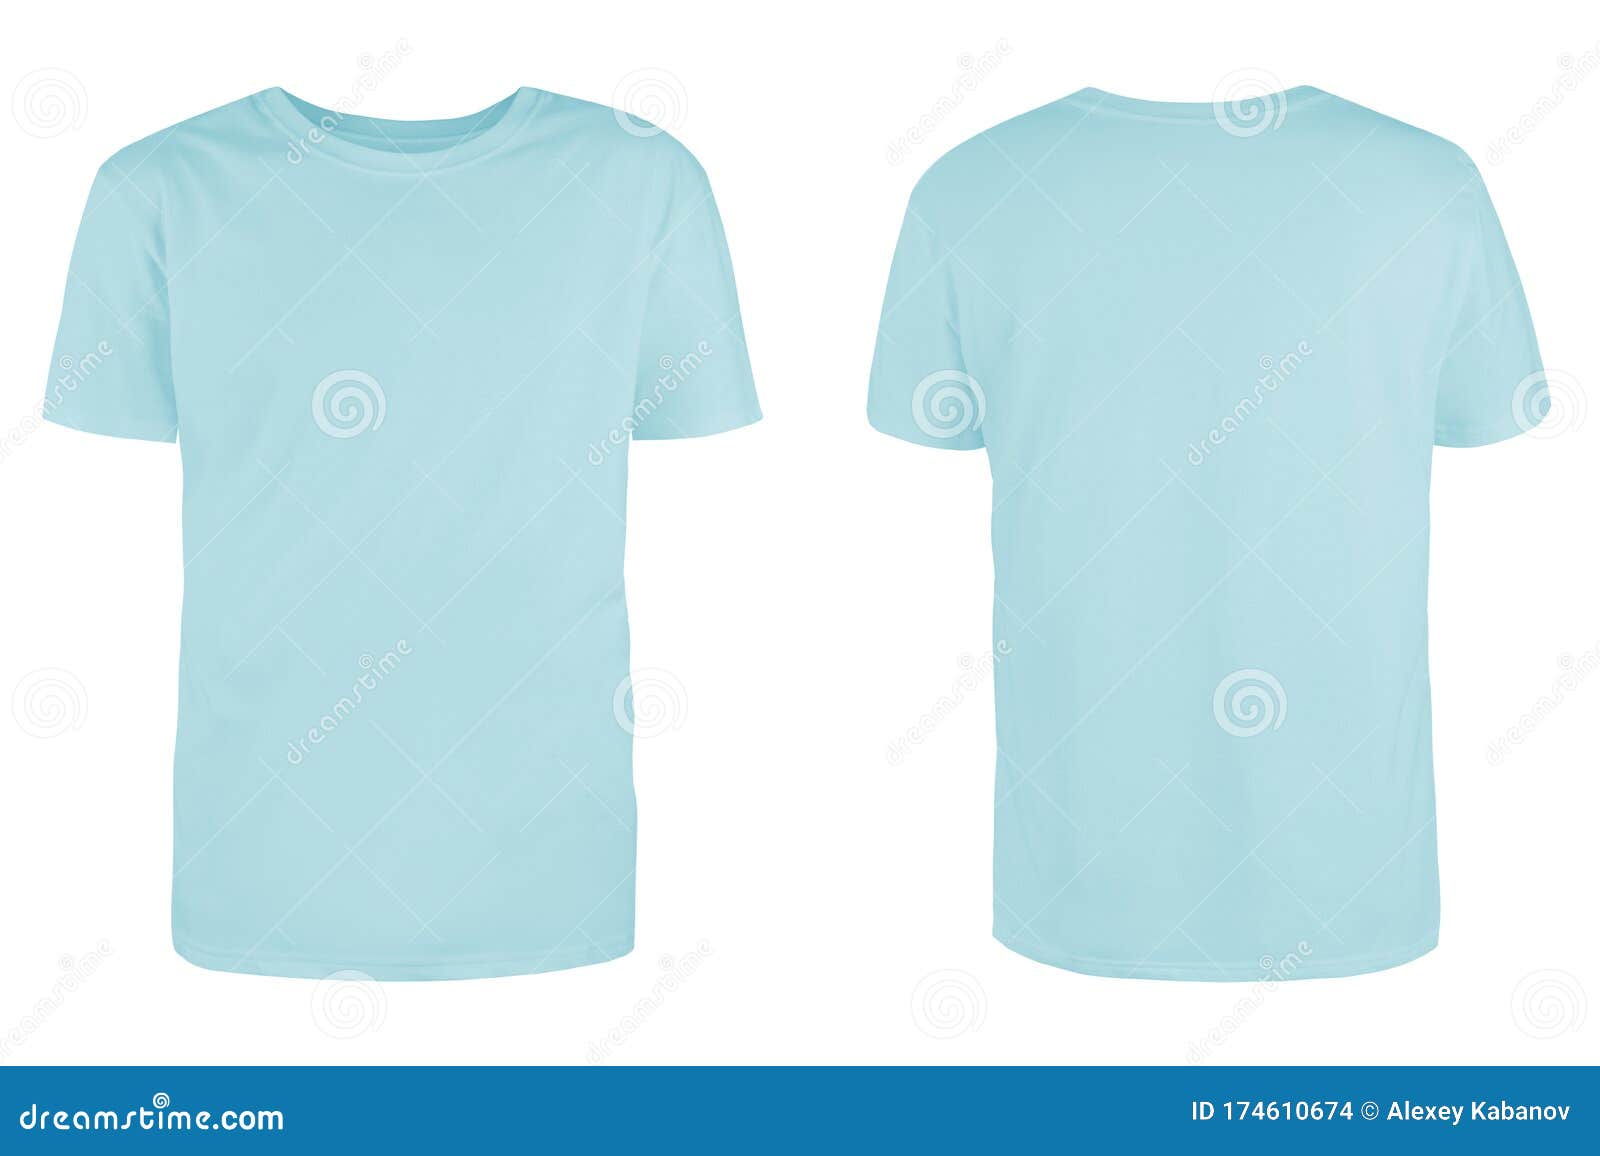 Download 835 Blue Blank T Shirt Mockup Isolated White Photos Free Royalty Free Stock Photos From Dreamstime